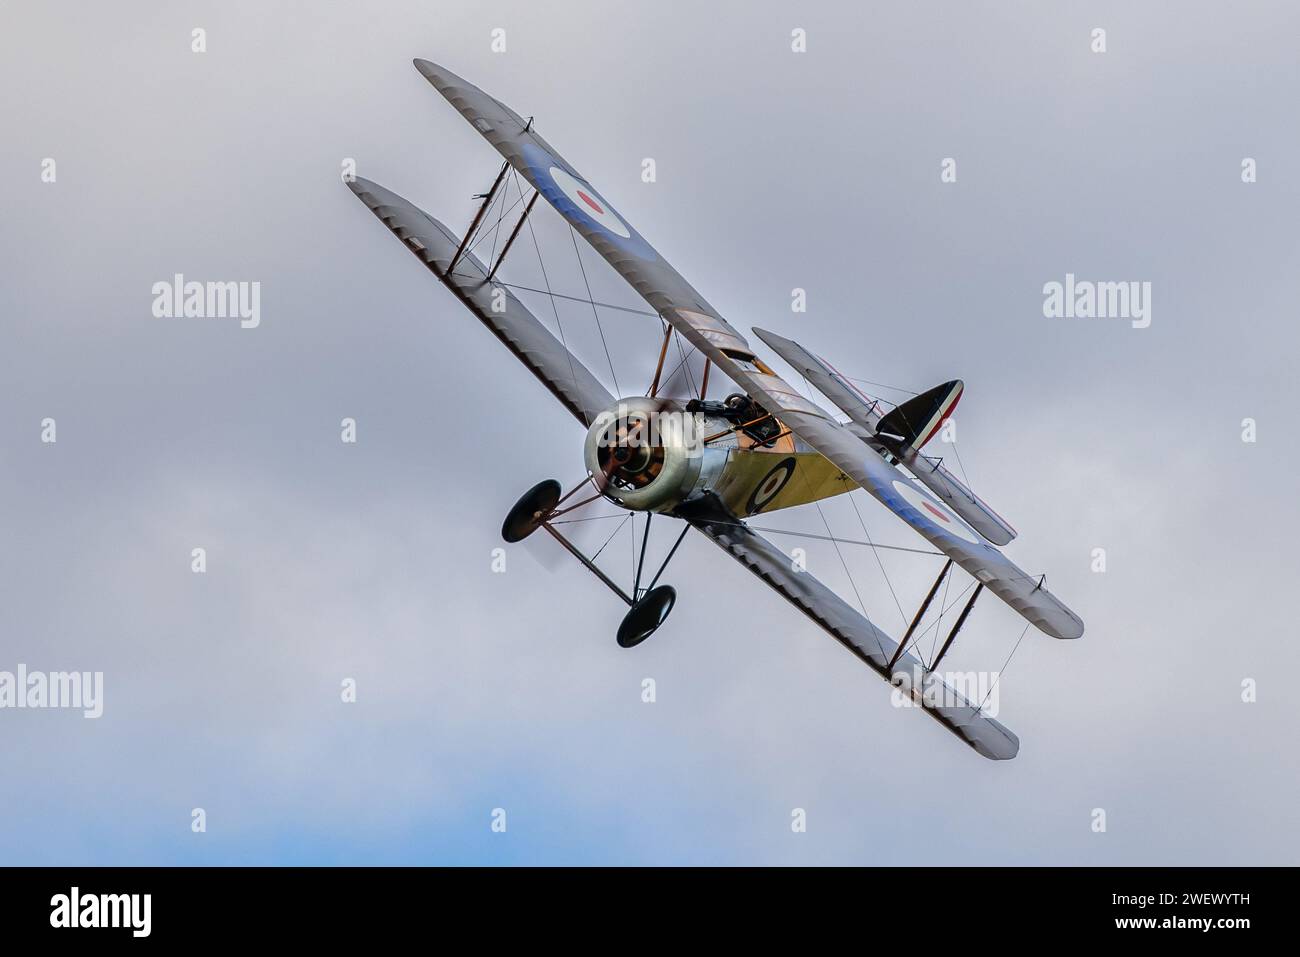 Old Warden, UK - 2nd October 2022: Vintage Sopwith Pup biplane in flight low over airfield. Close up shot Stock Photo